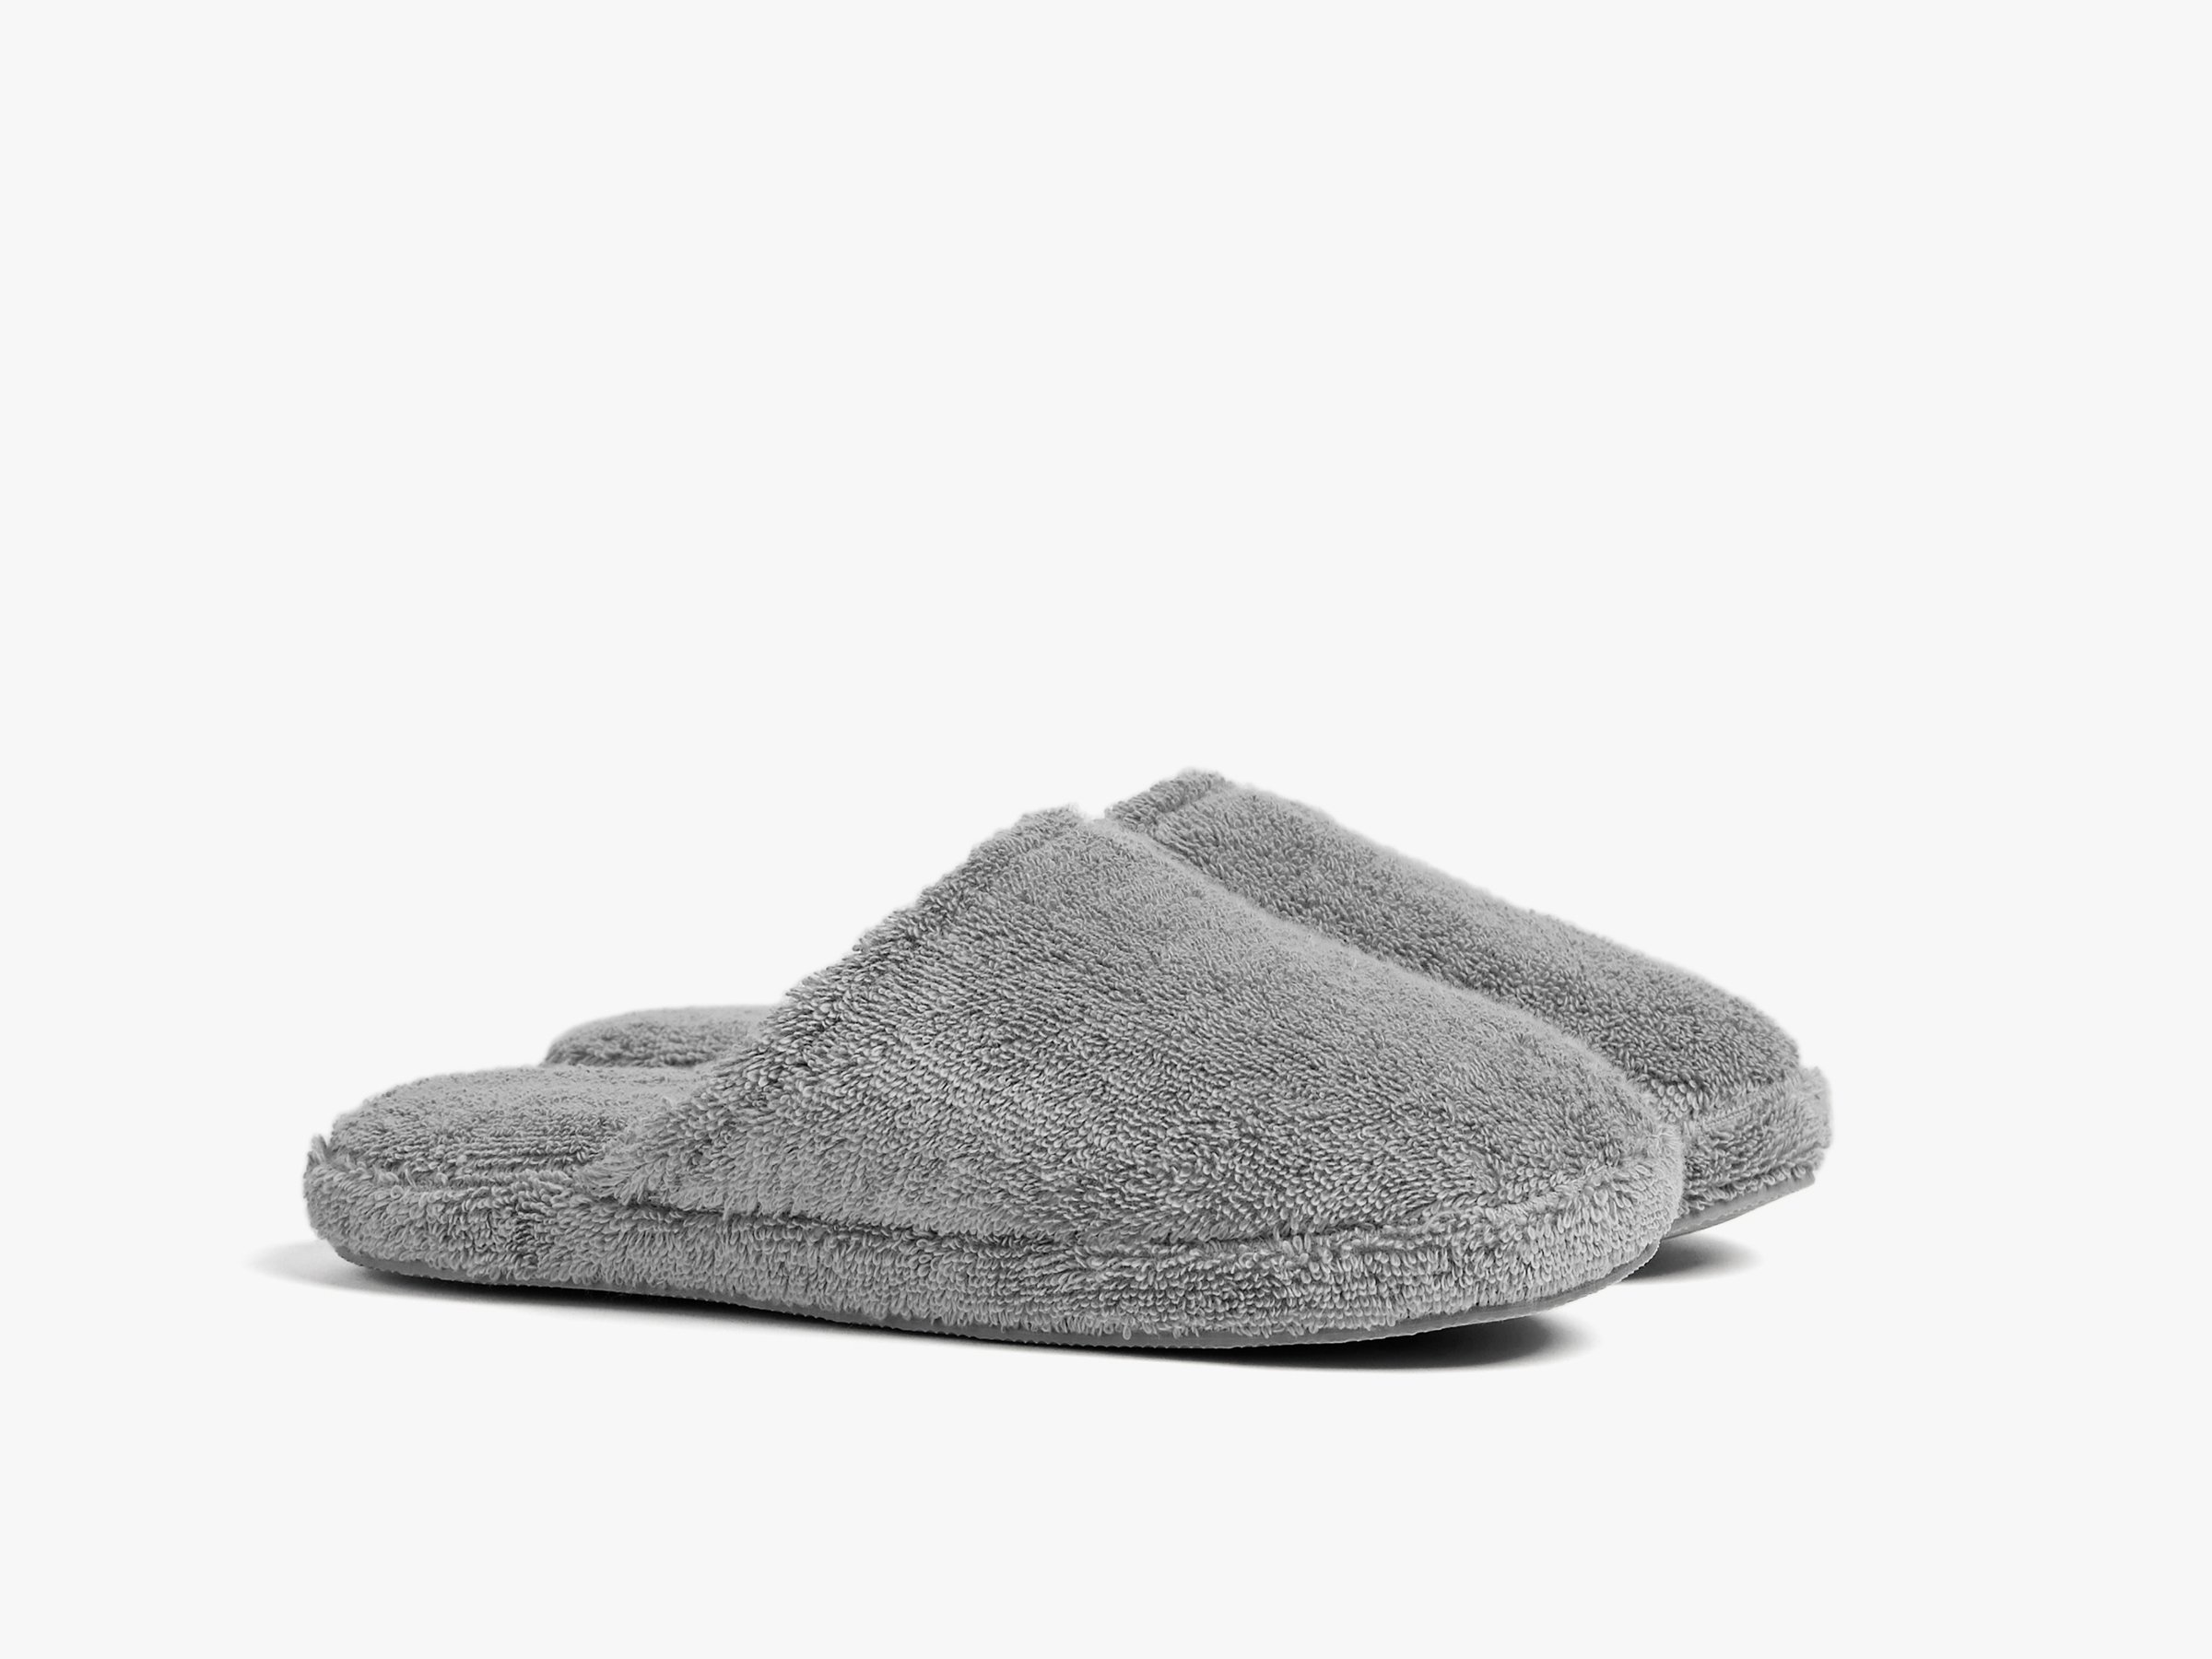 The Best Men's Slippers To Pamper Your Feet In Style - Beauty News